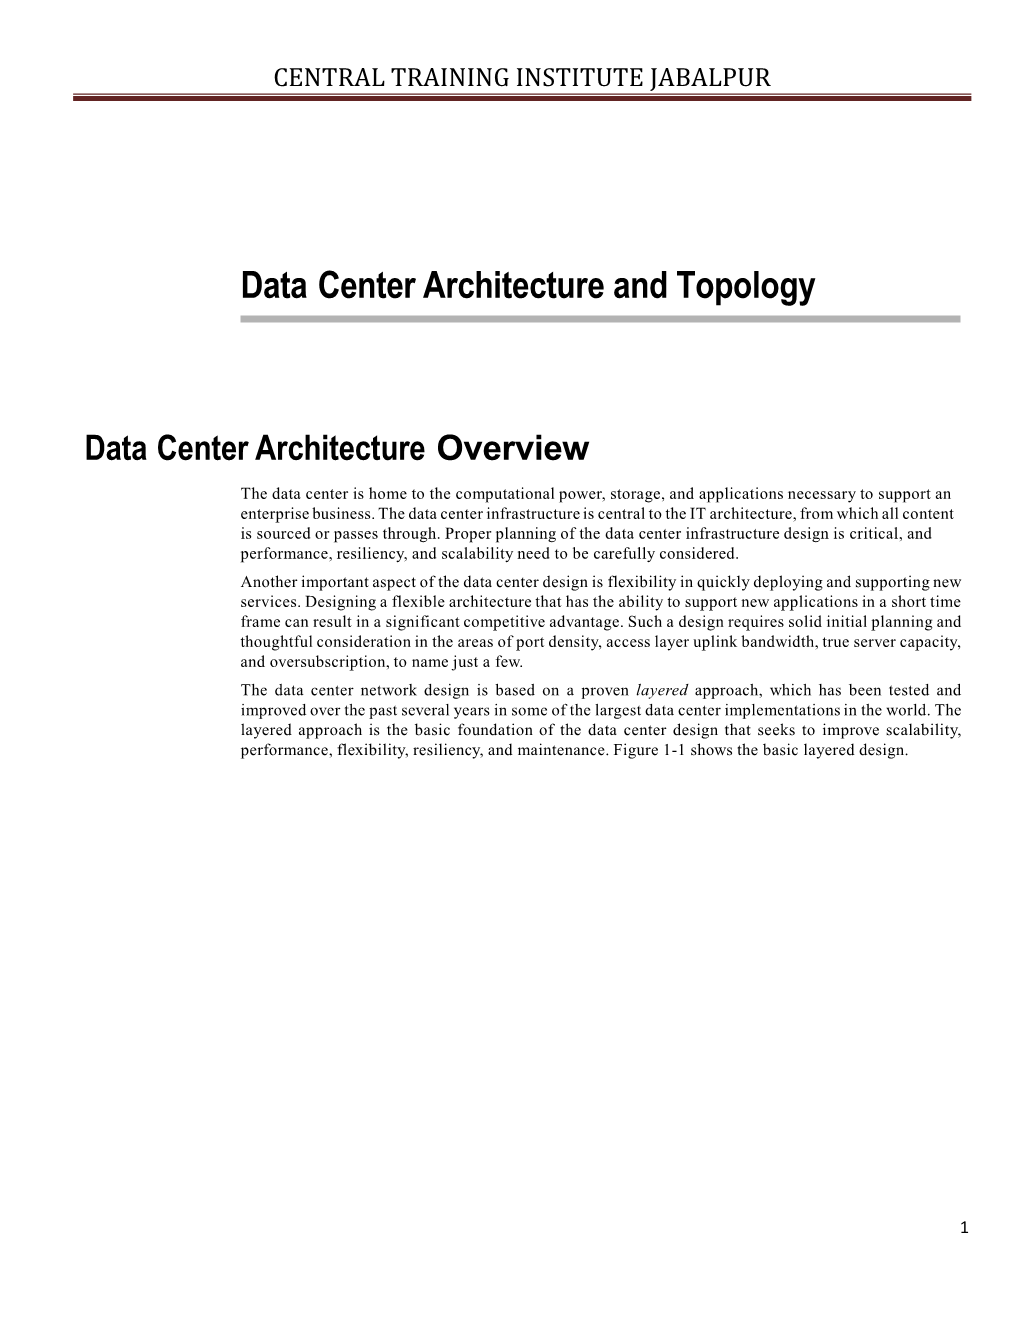 Data Center Architecture and Topology